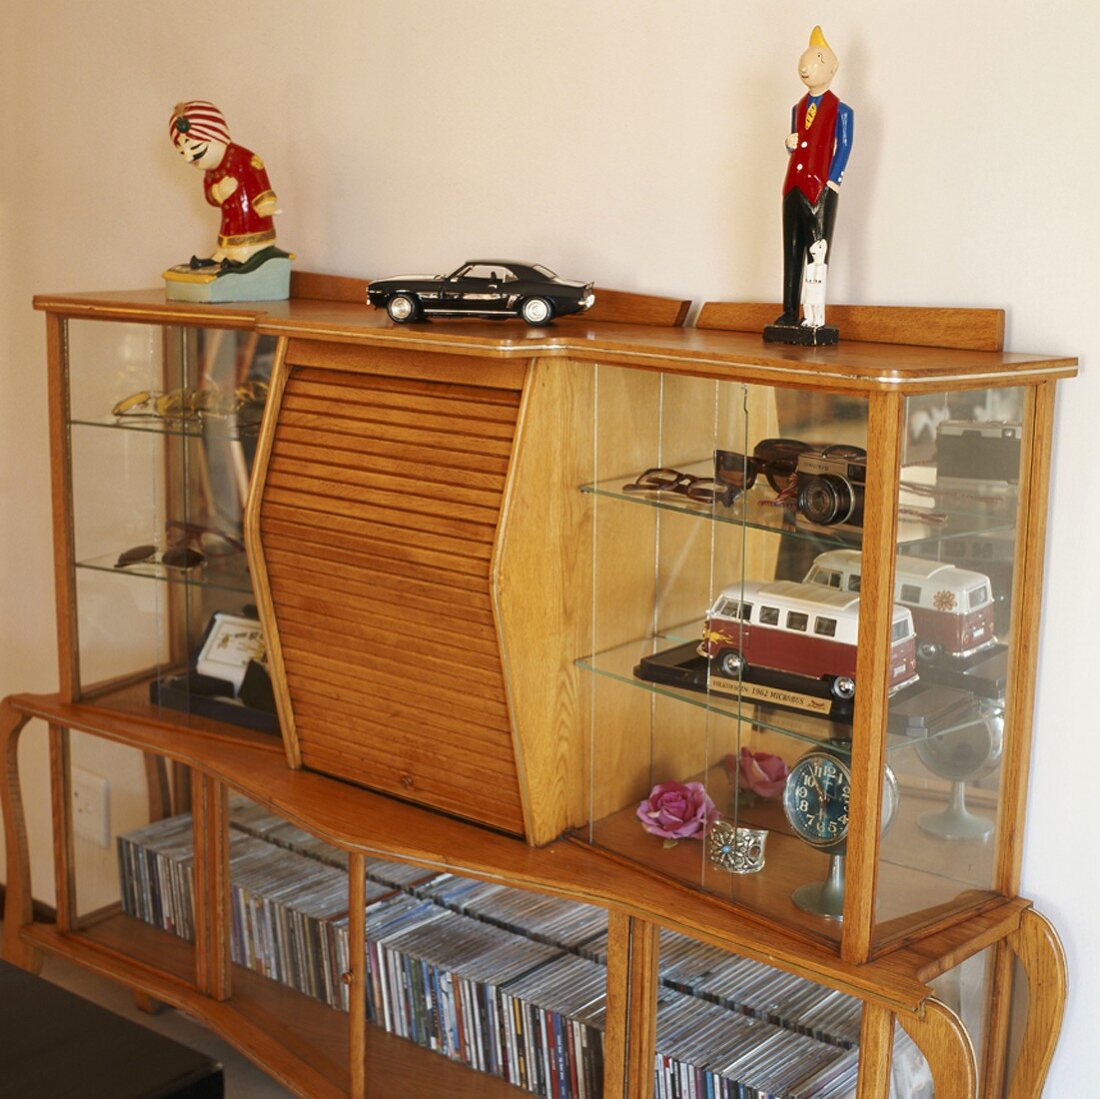 CDs & various ornaments in glass-fronted cabinet